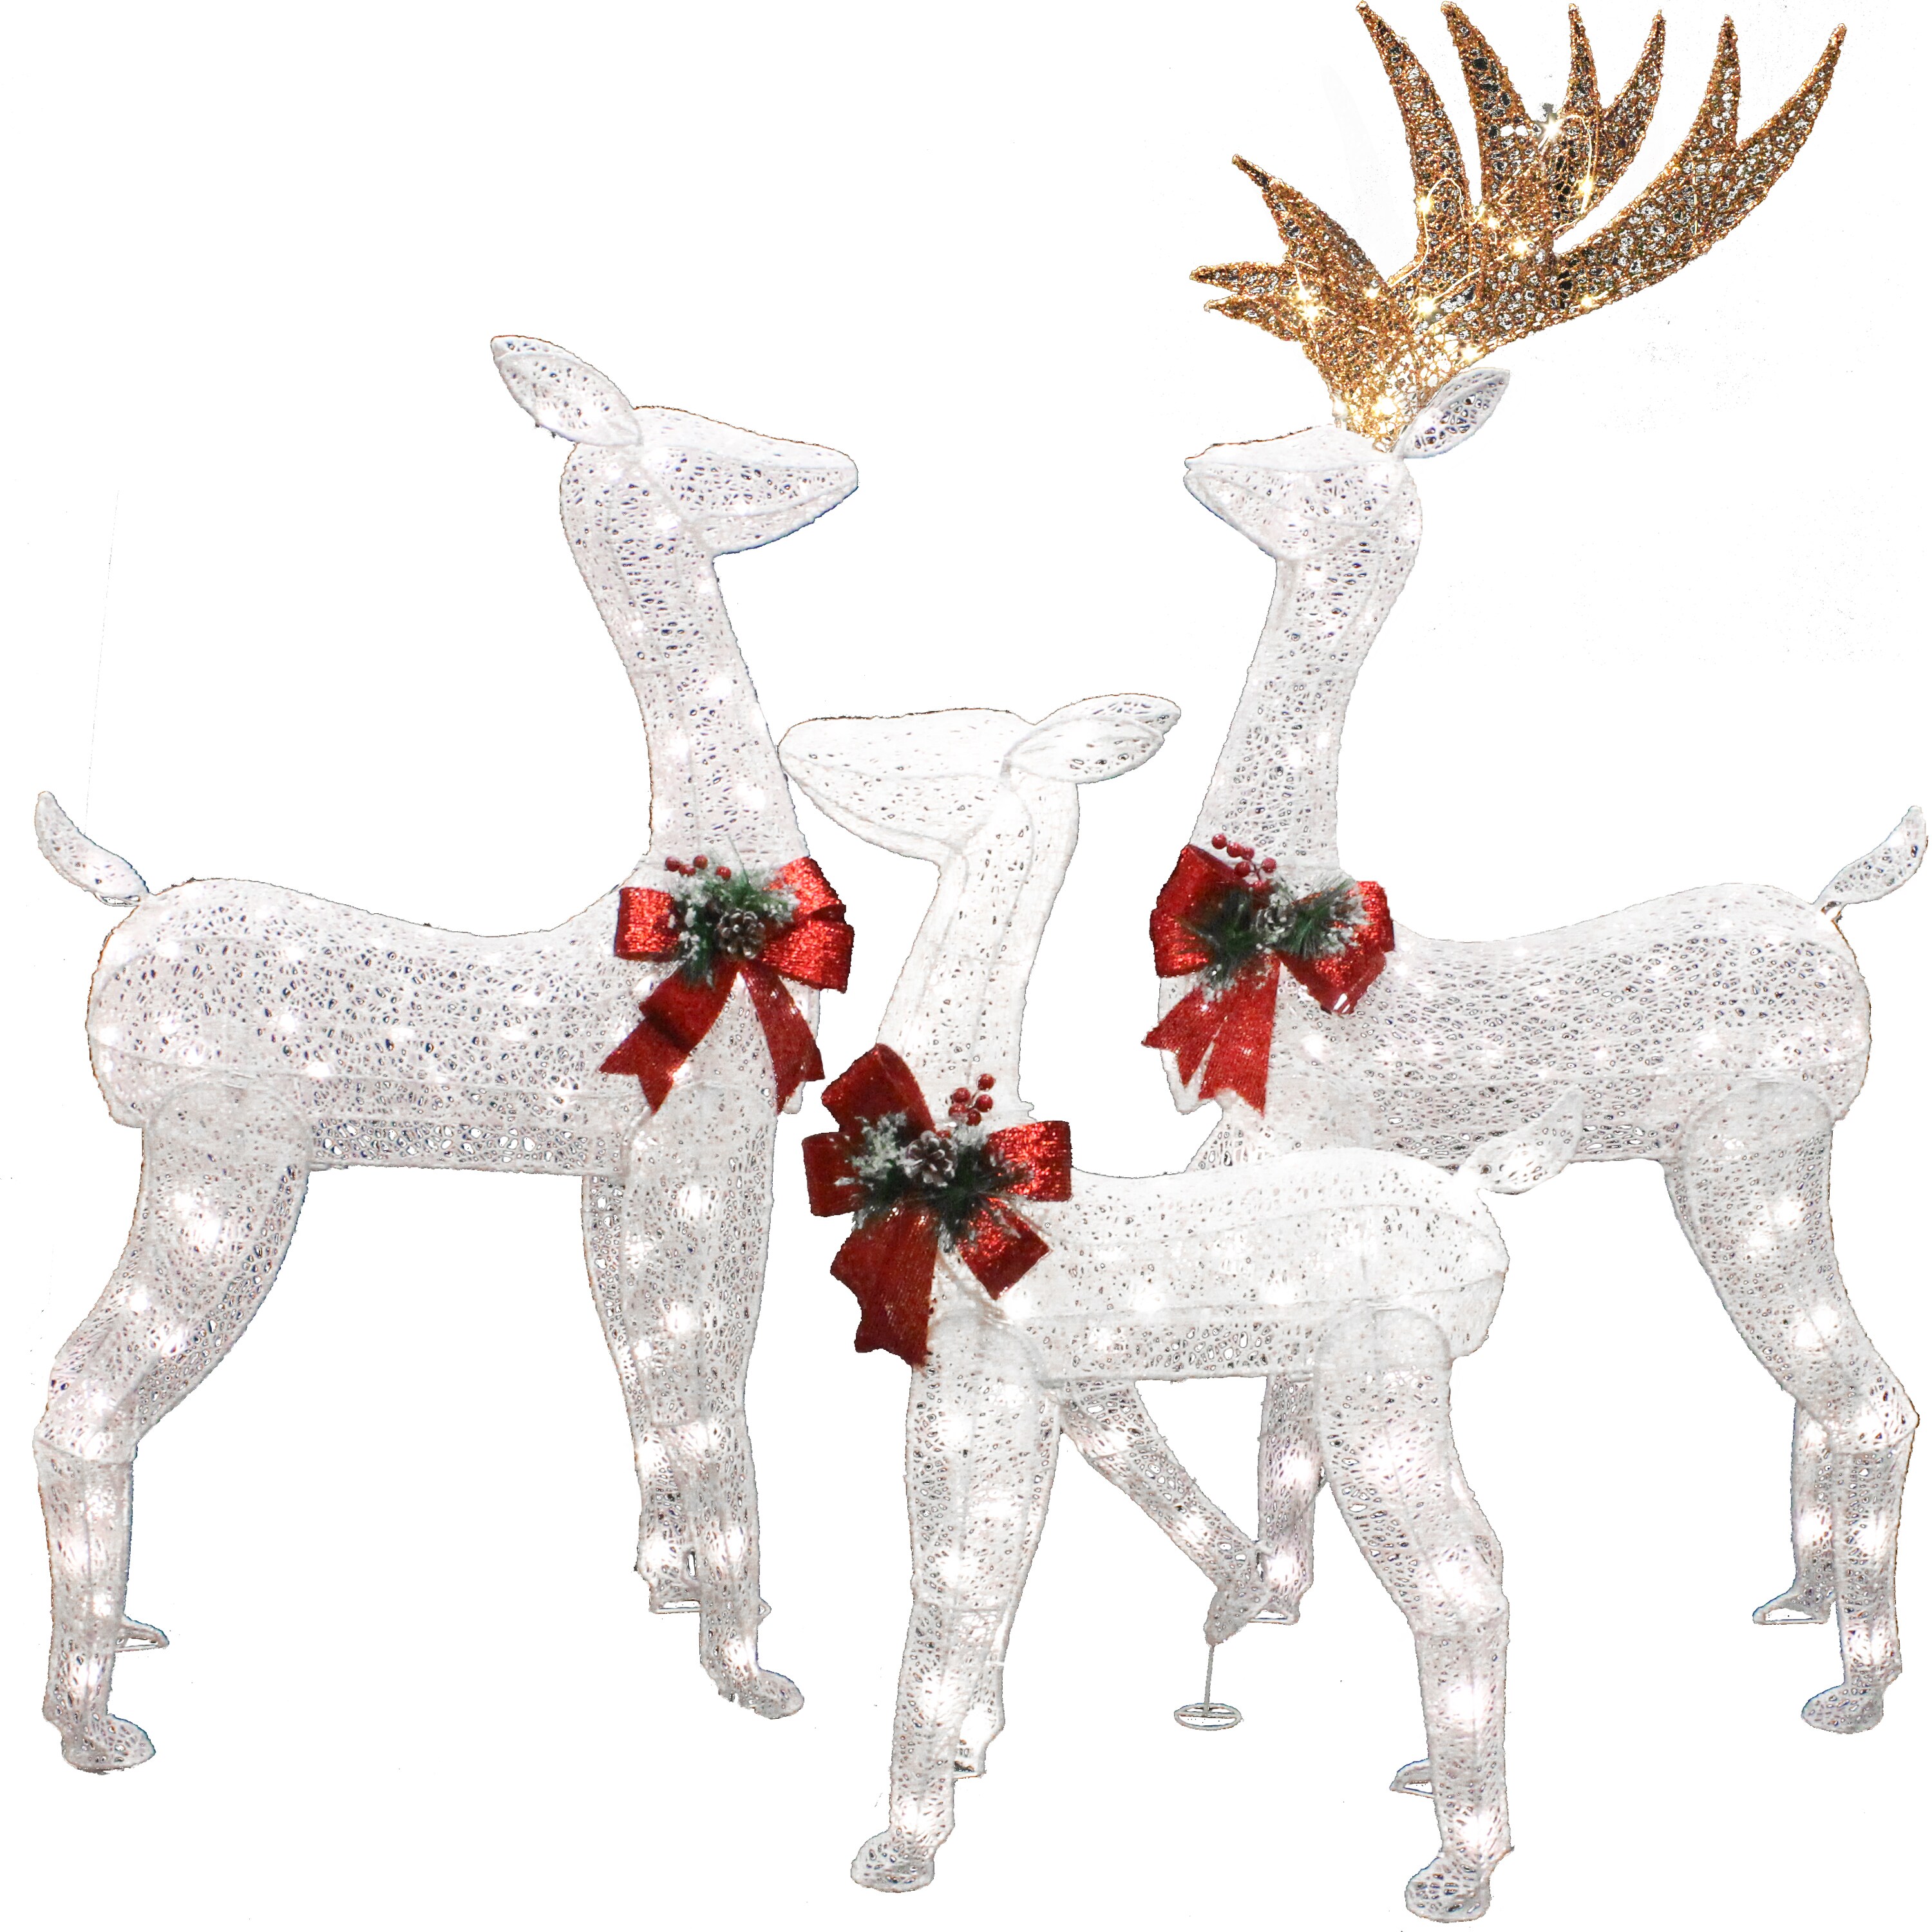 Our Christmas LED Yard Light includes a 5ft Tall Reindeer Buck with 100 LED...